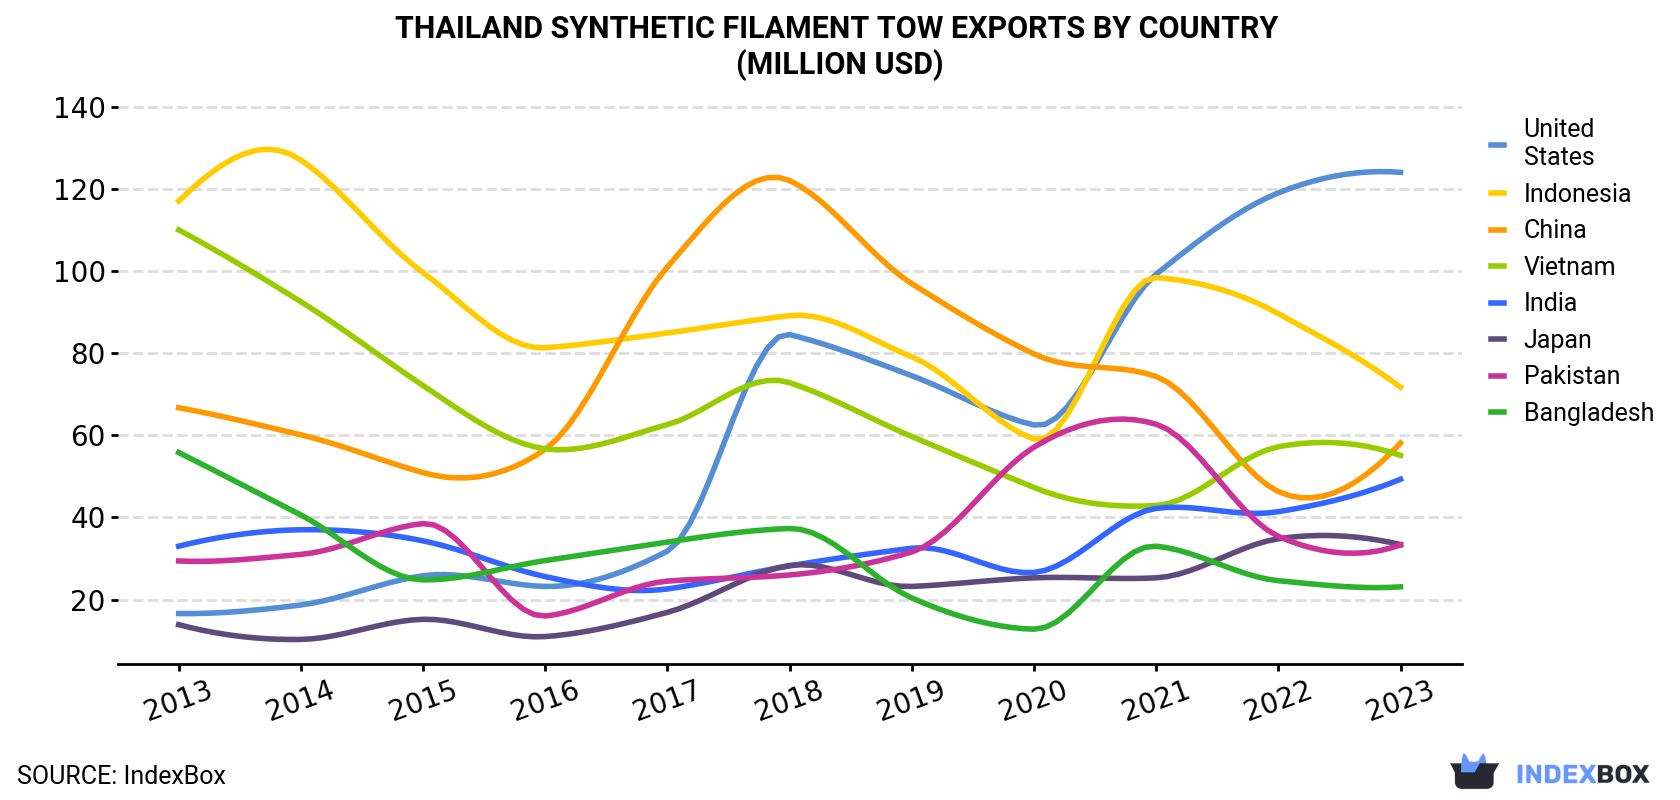 Thailand Synthetic Filament Tow Exports By Country (Million USD)